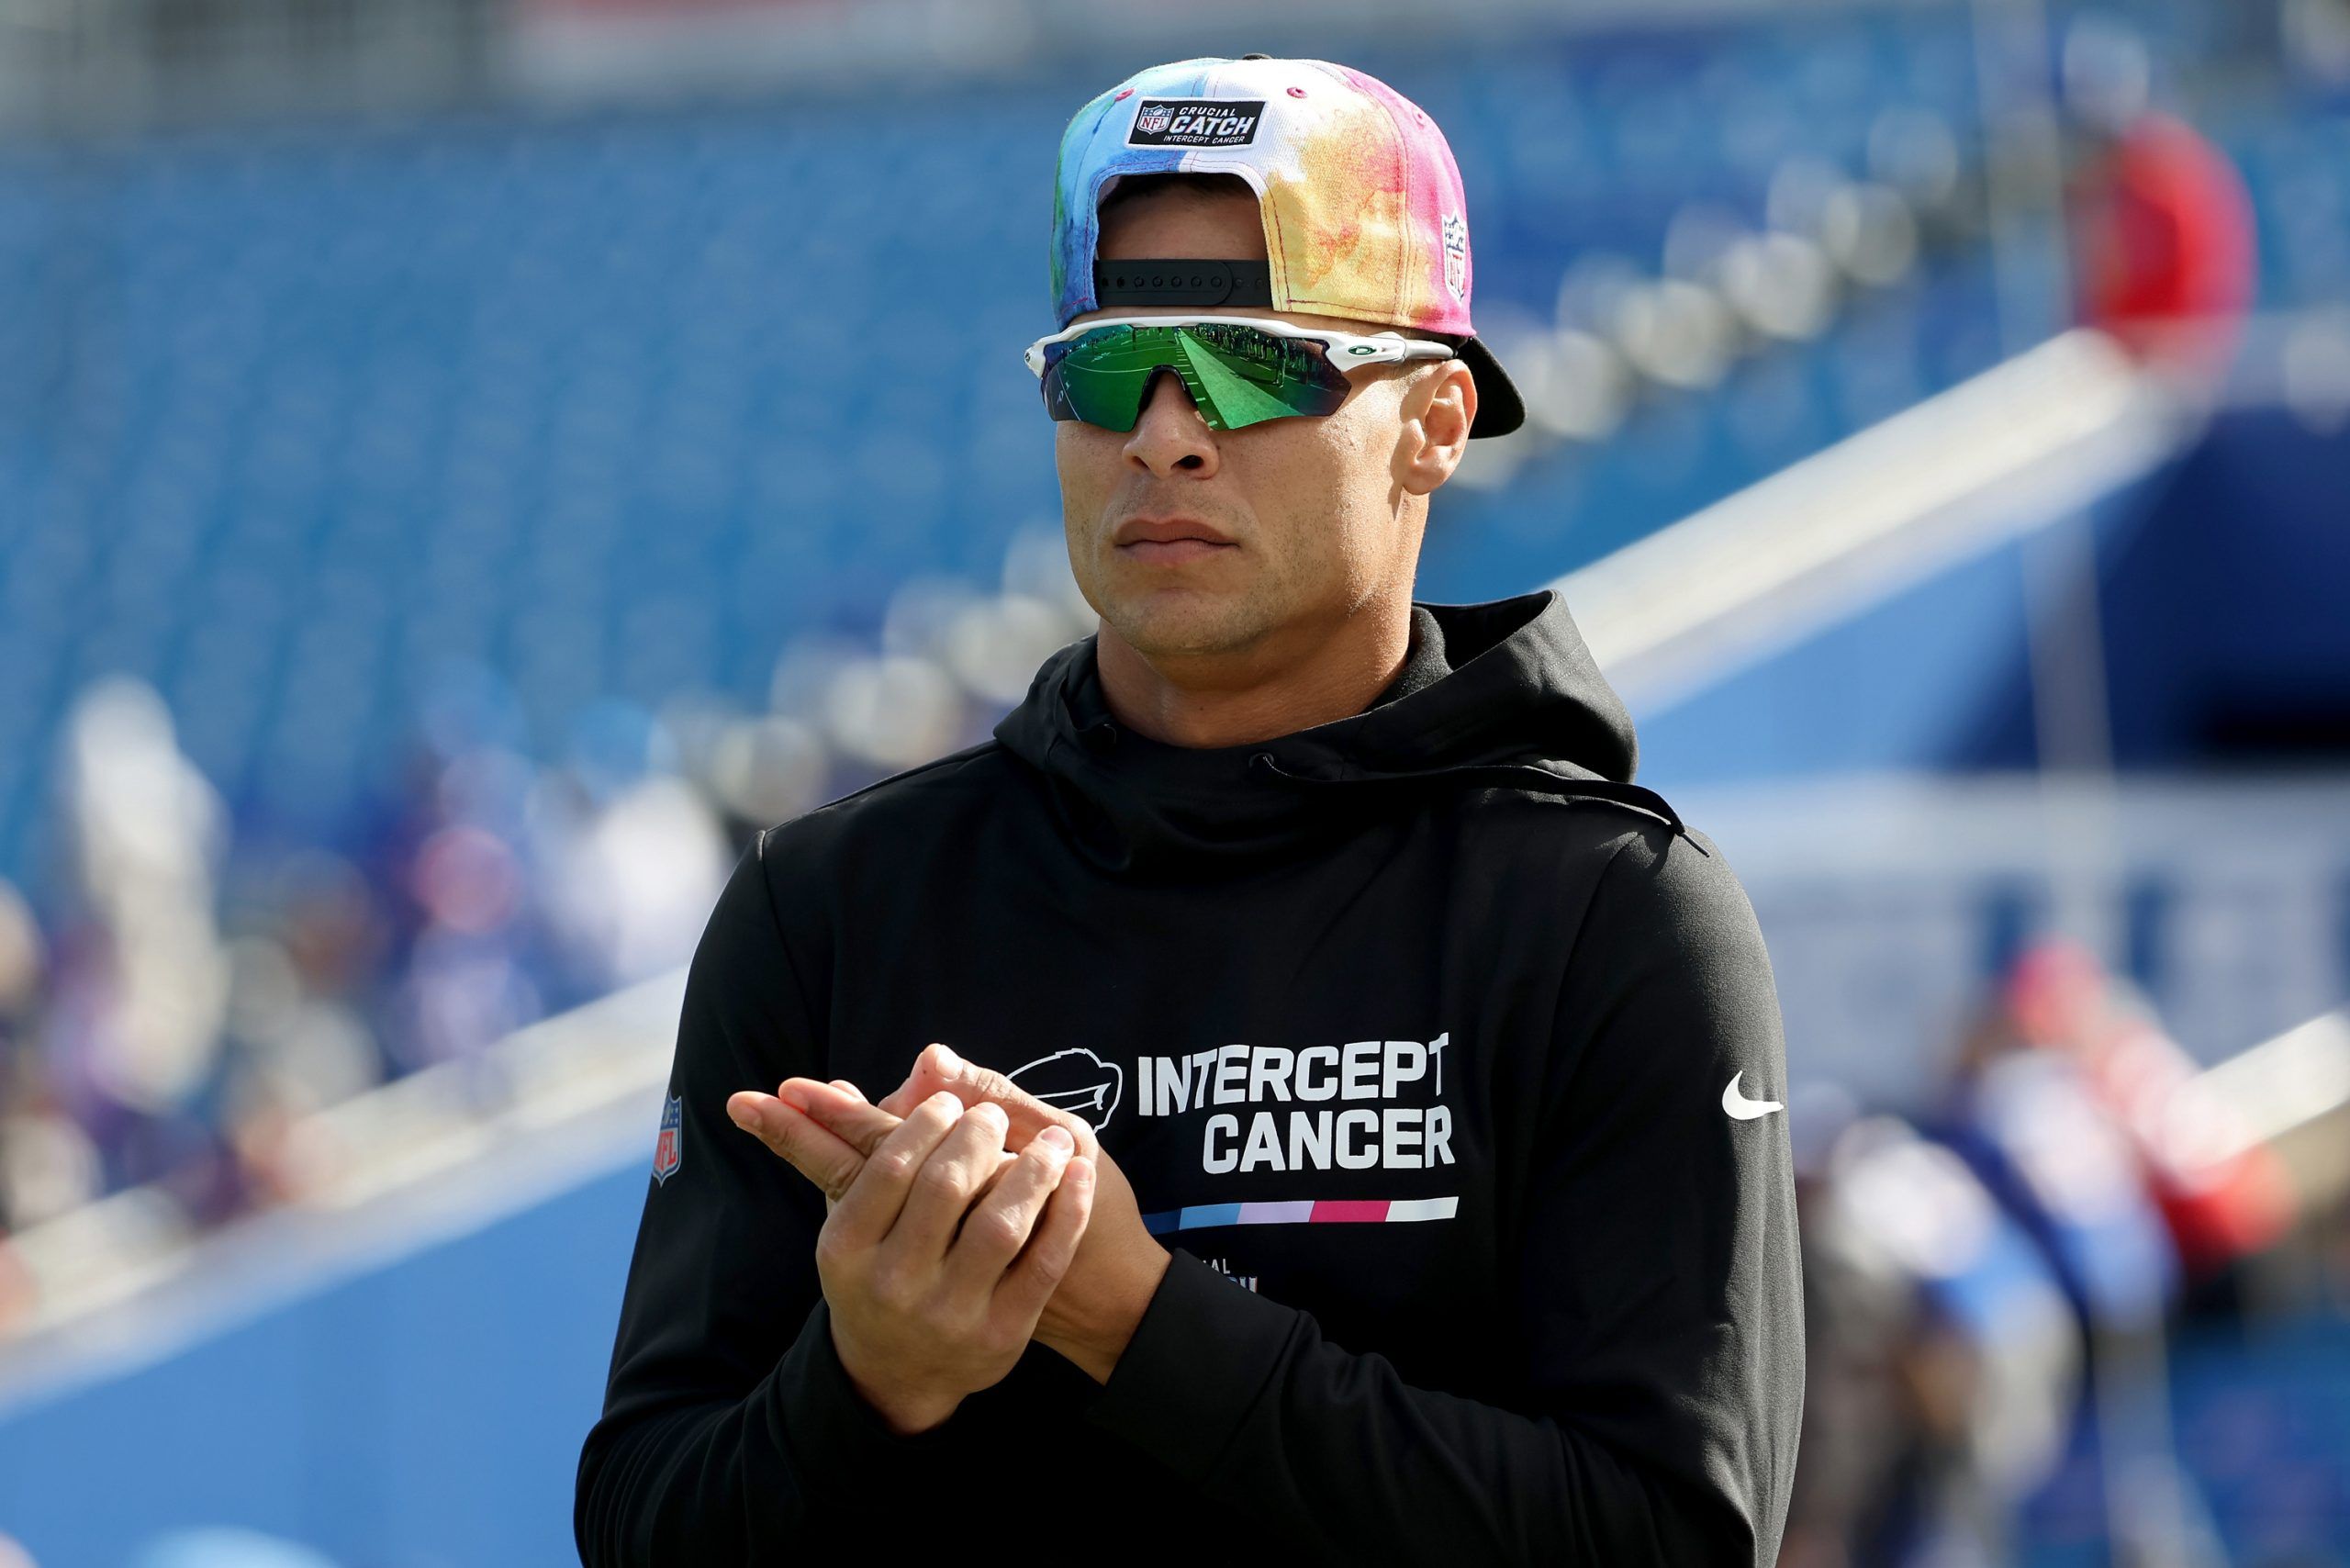 Buffalo Bills safety Jordan Poyer #21 looks on before a game against the Pittsburgh Steelers at Highmark Stadium on October 09, 2022 in Orchard Park, New York. (Photo by Timothy T Ludwig/Getty Images)